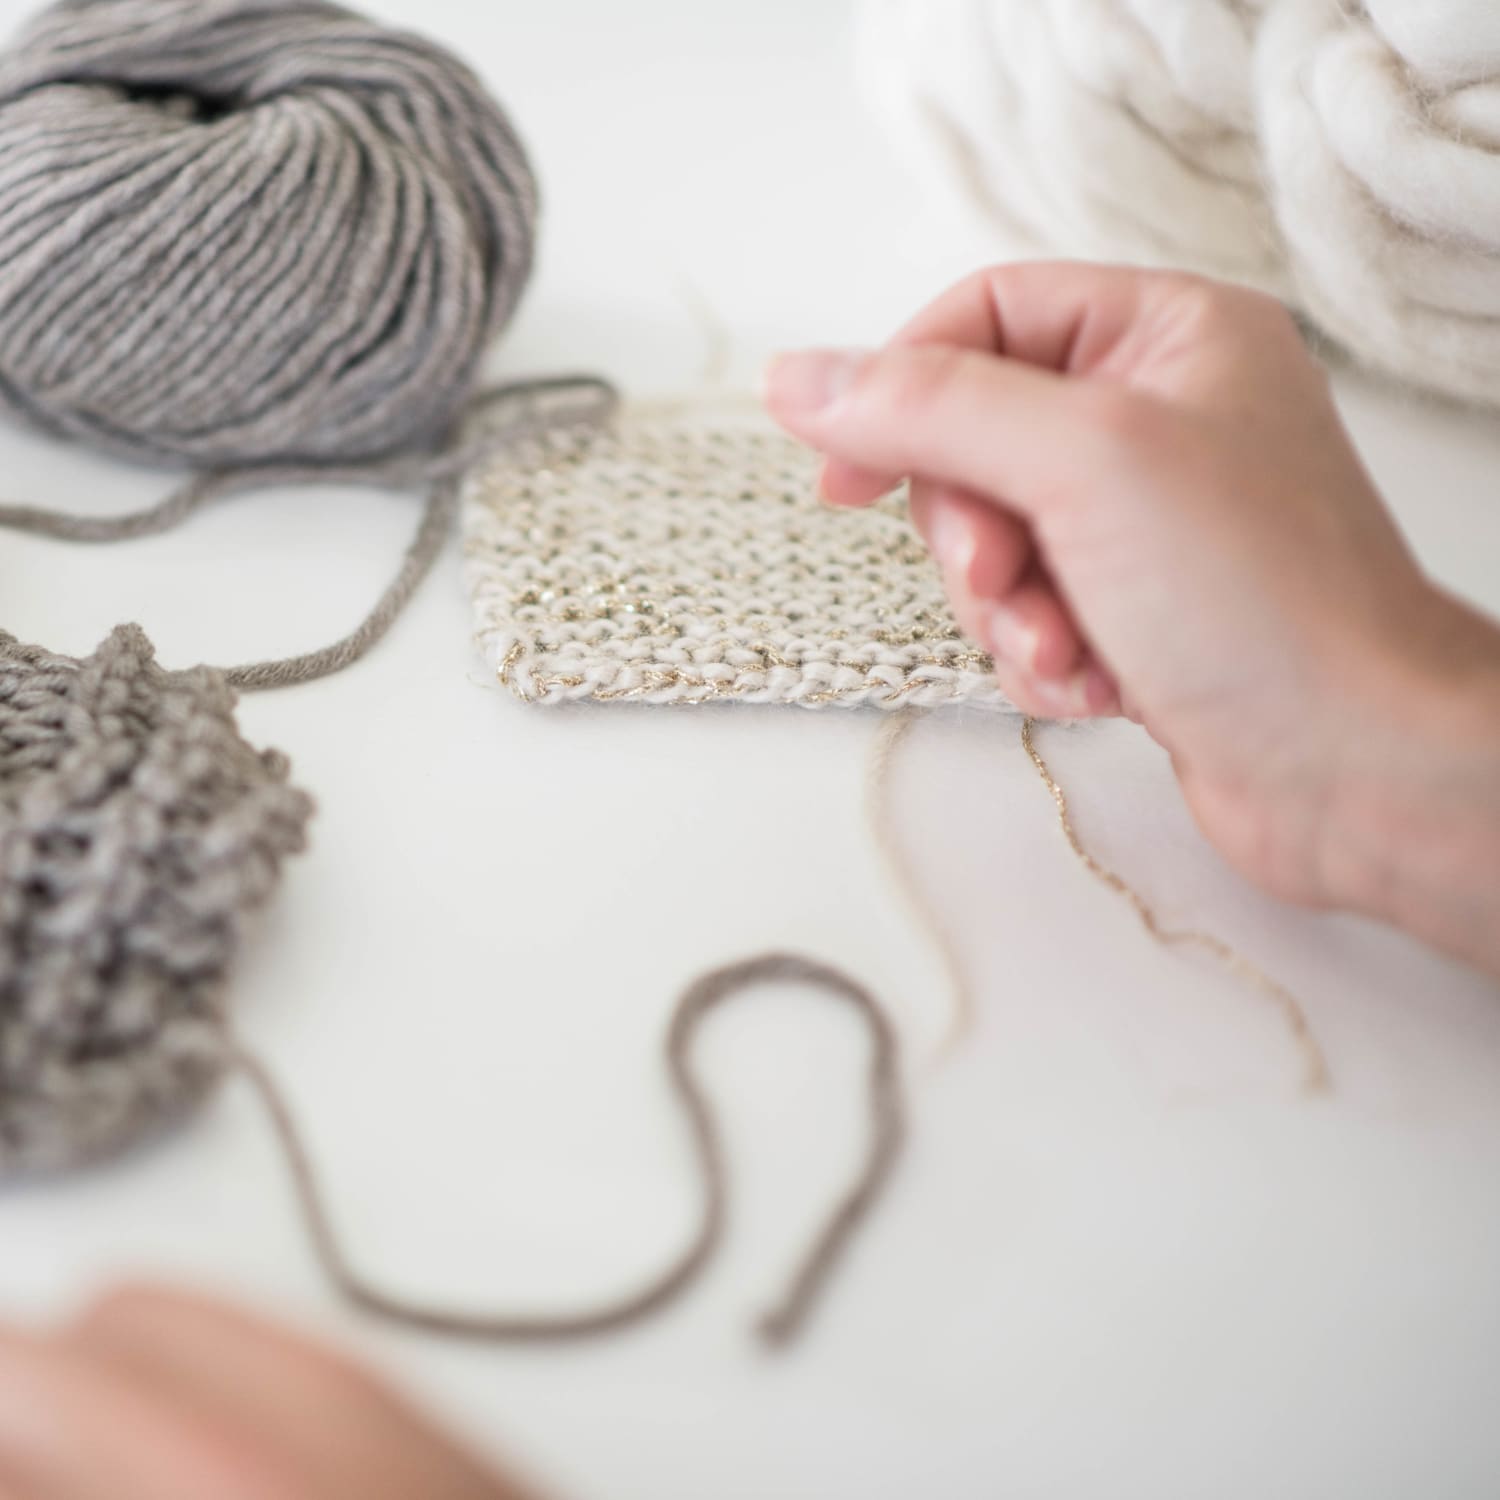 Knitting For Beginners Great Resources To Get Started